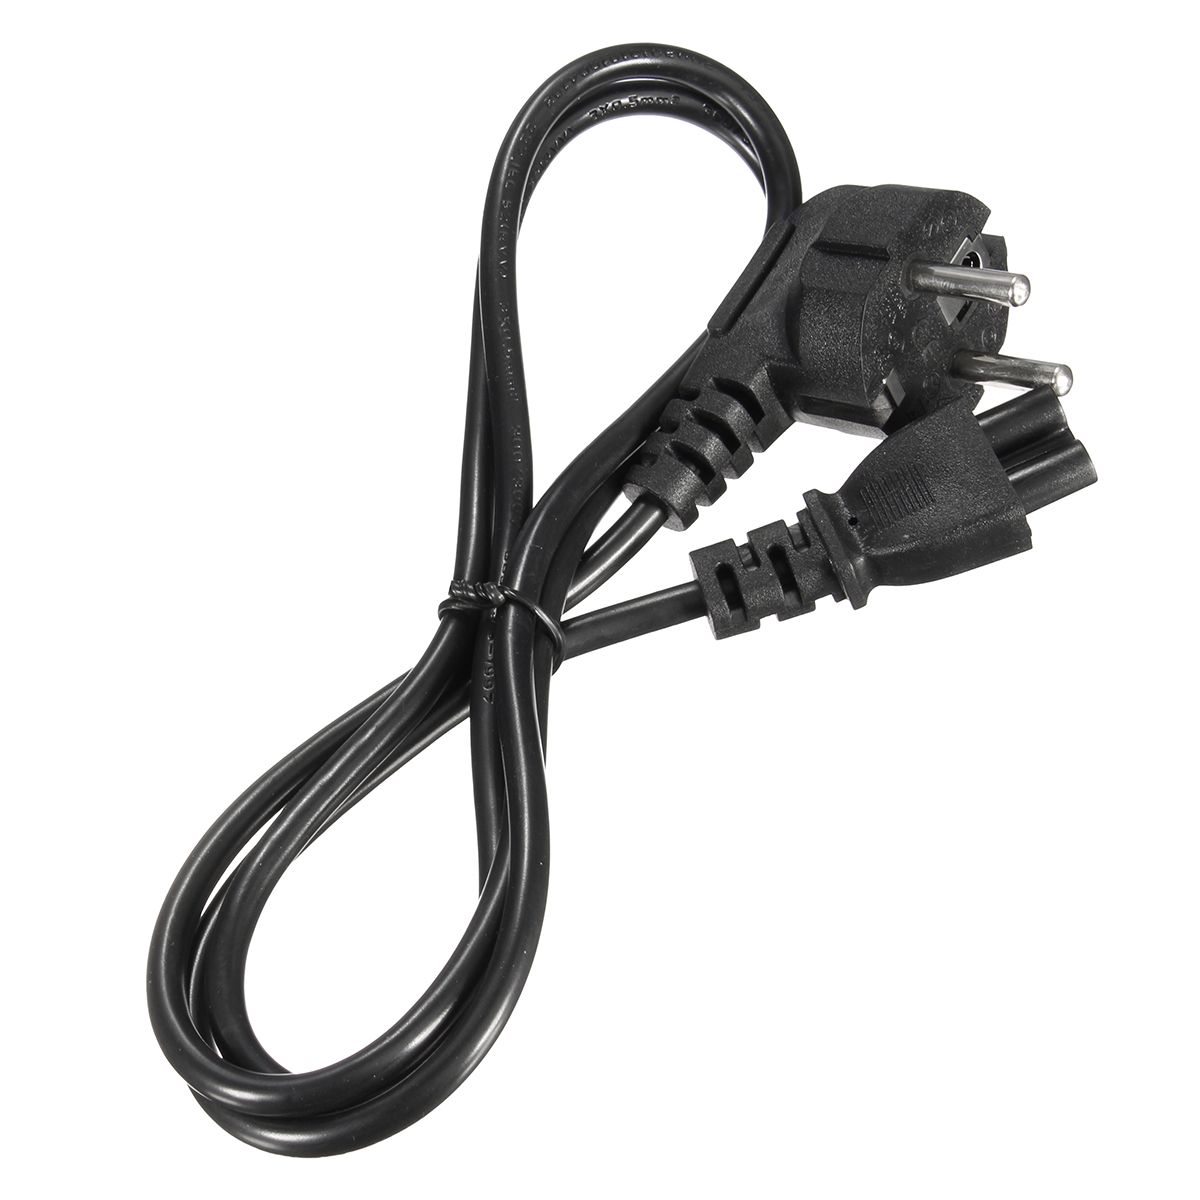 EU-3-Prong-AC-Power-Cord-2-Pin-Adapter-Cable-250V-10A-Interface-Laptop-Ac-Power-Adapter-Netbook-Char-1709044